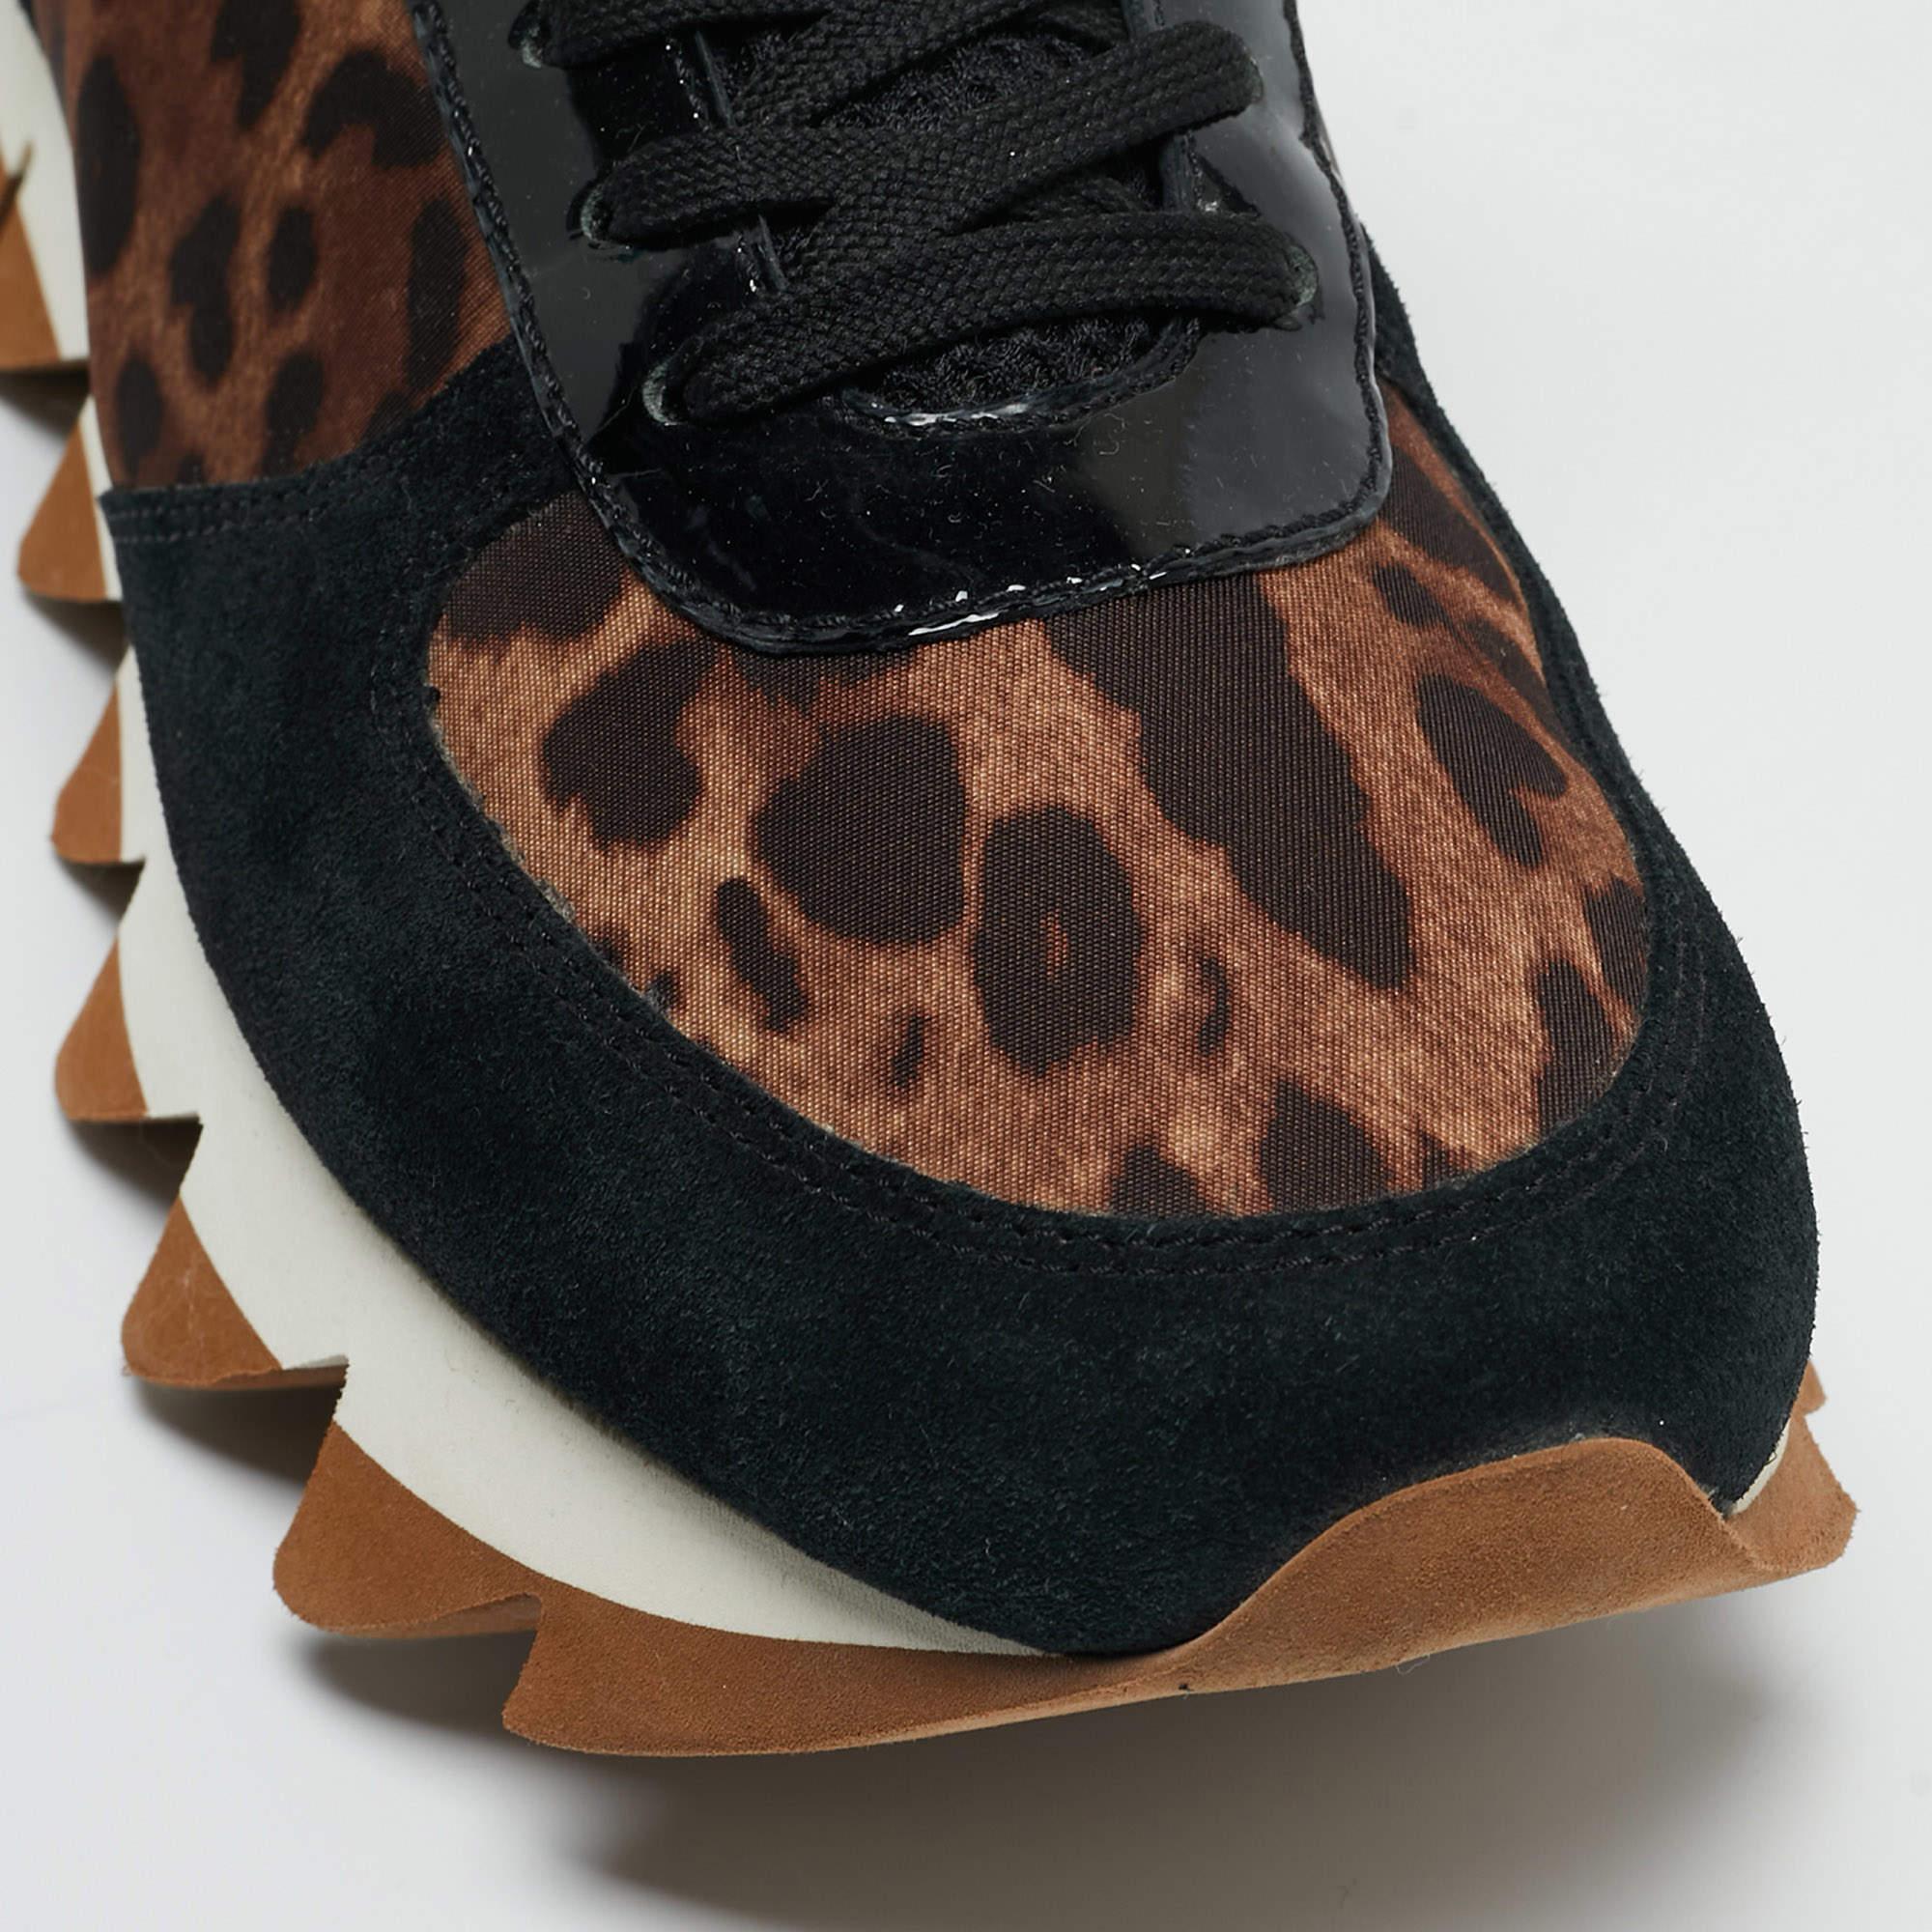 Dolce & Gabbana Suede and Leopard Print Fabric Low Top Sneakers Size 40 In Good Condition For Sale In Dubai, Al Qouz 2